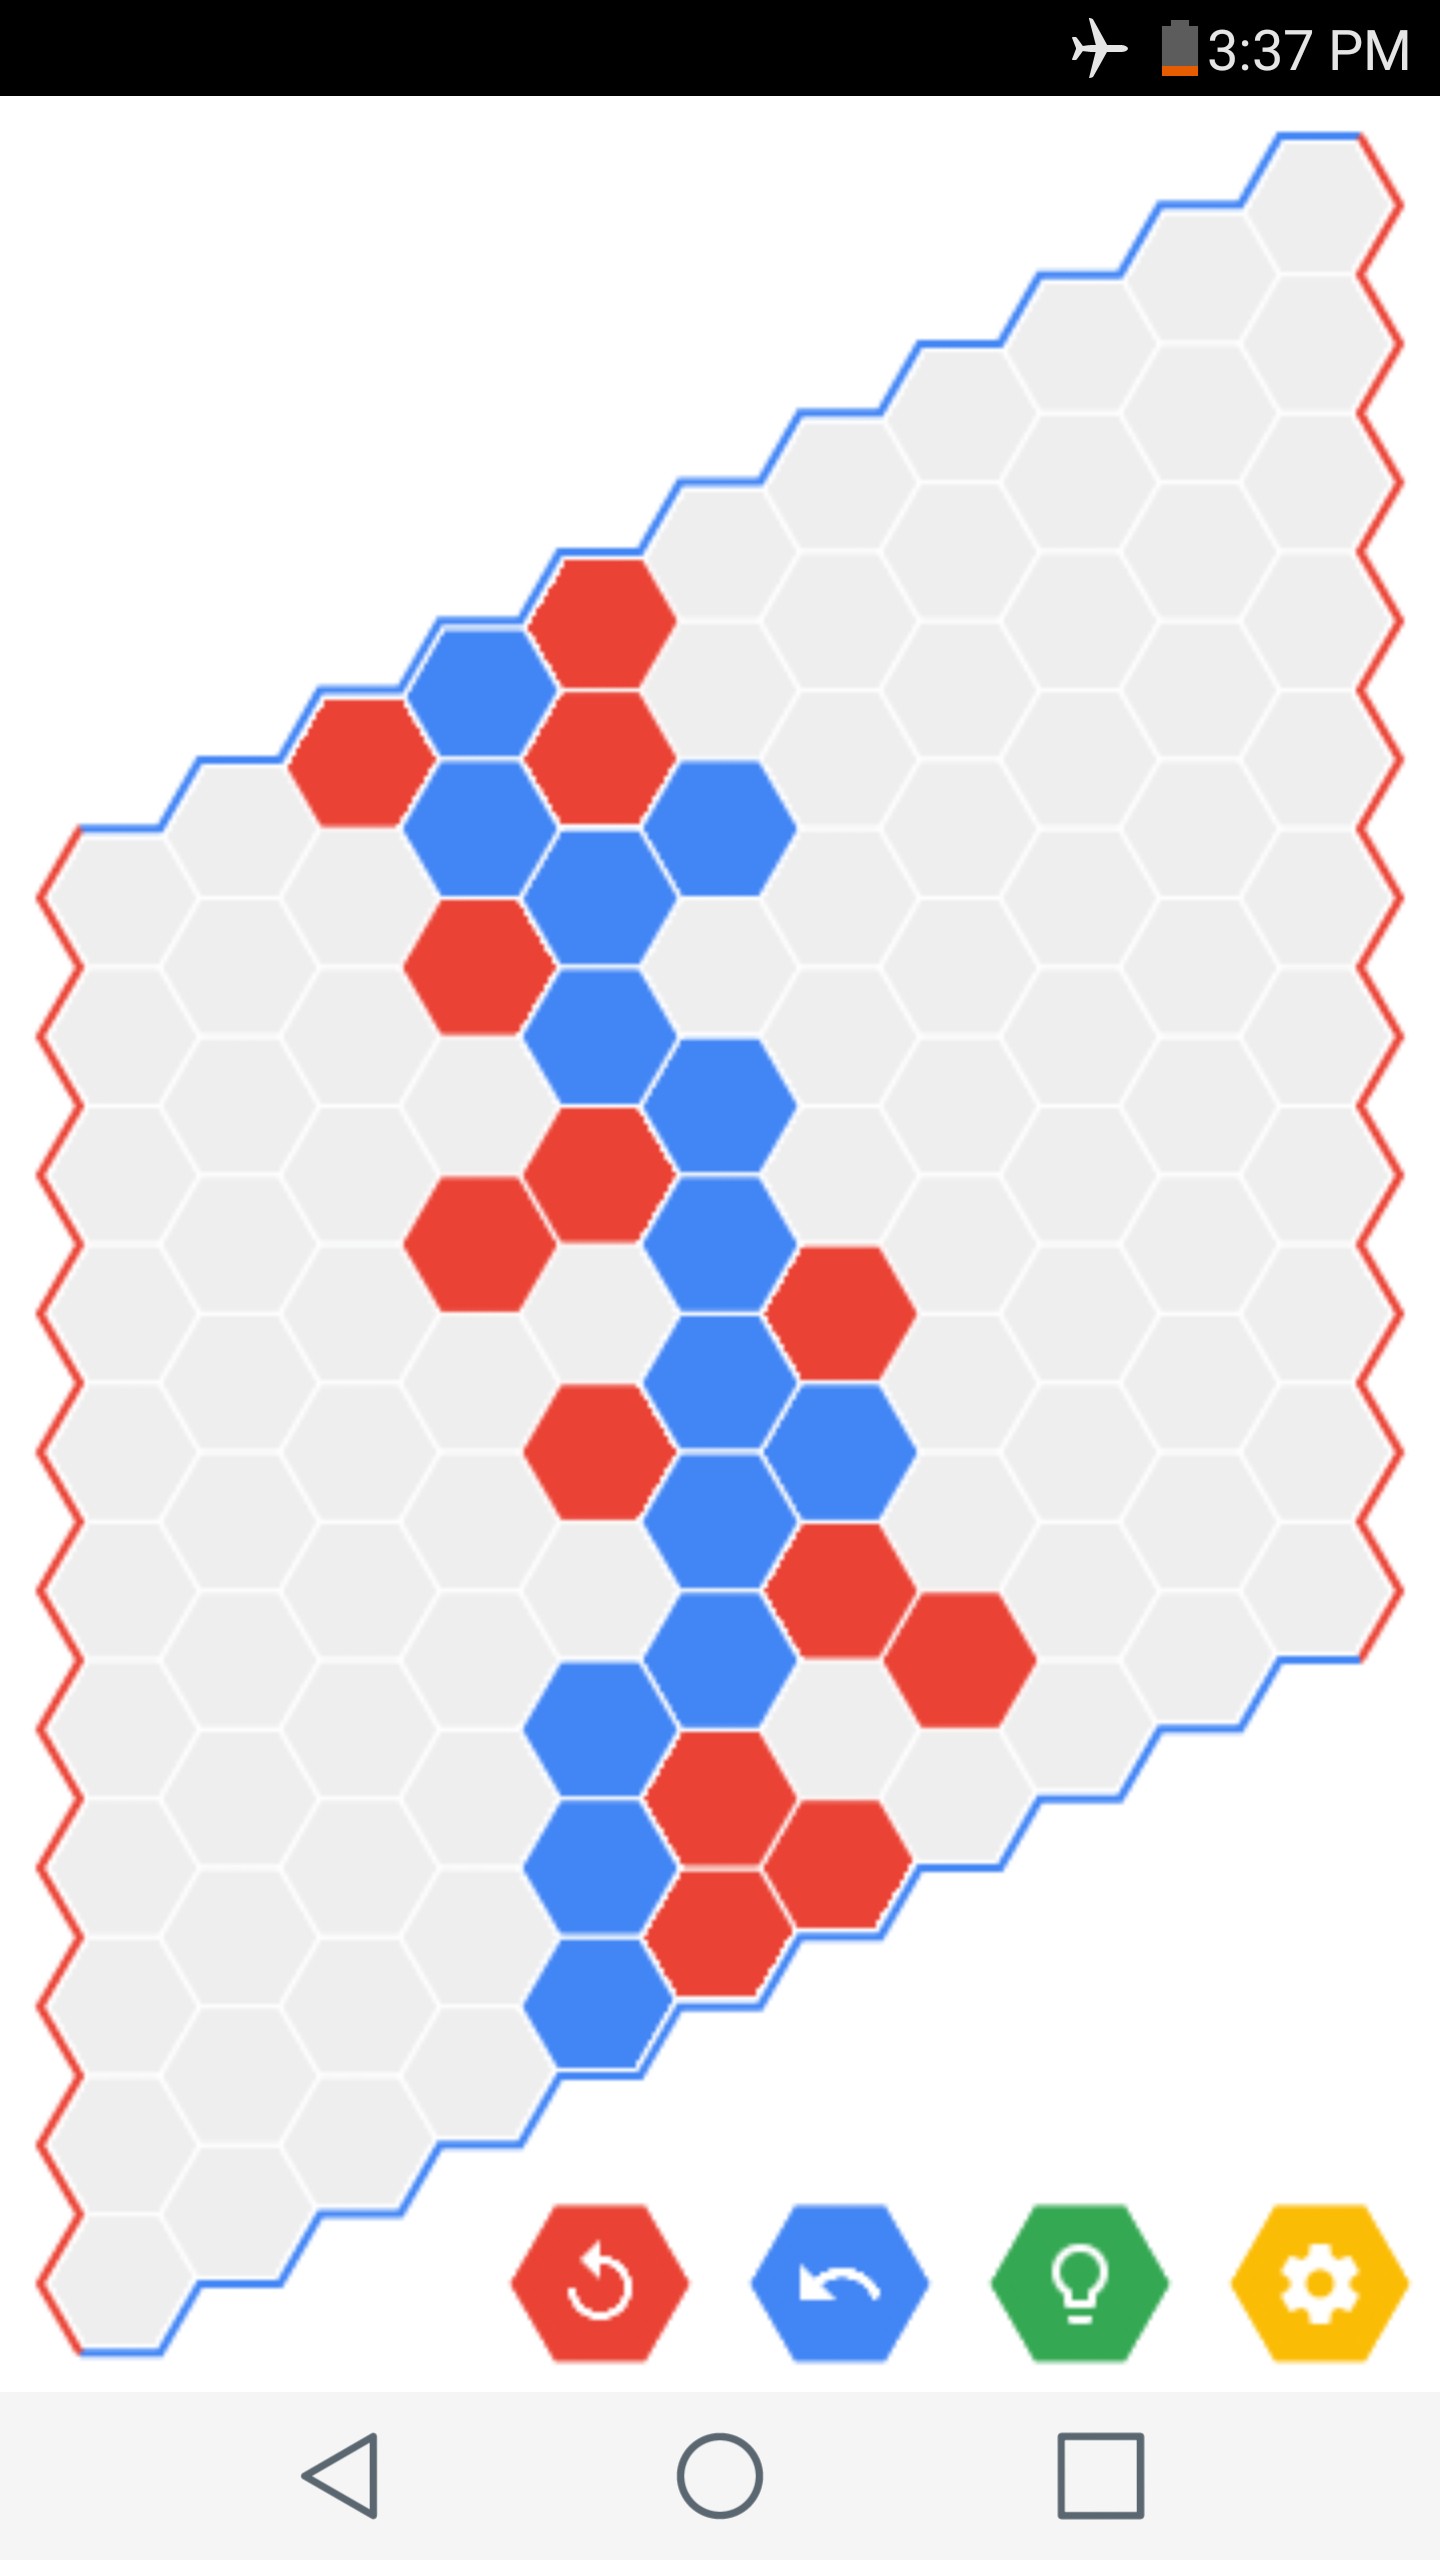 Hex: A Game About Connecting